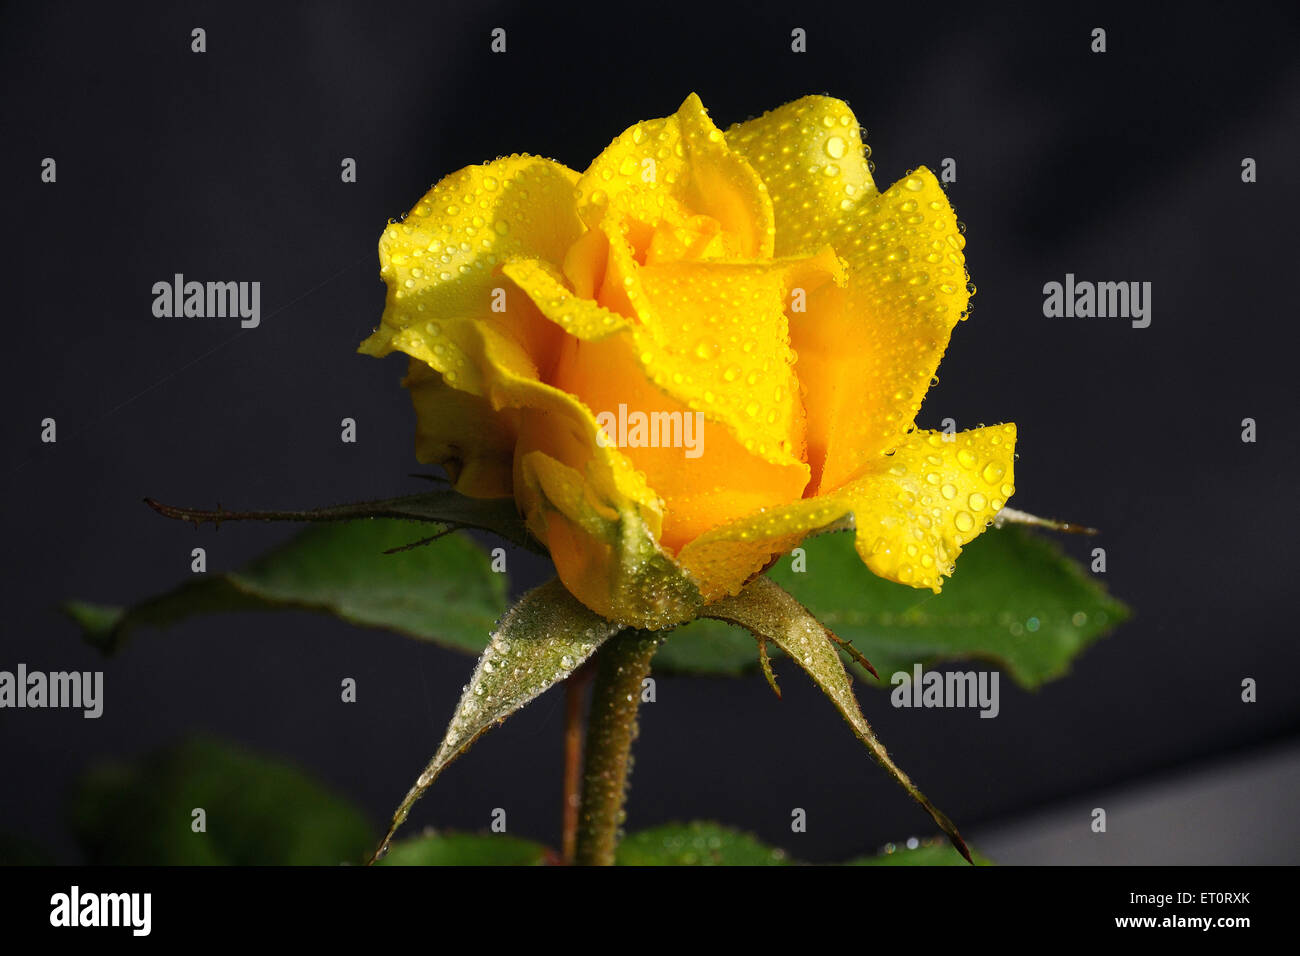 yellow rose with dew drops Stock Photo